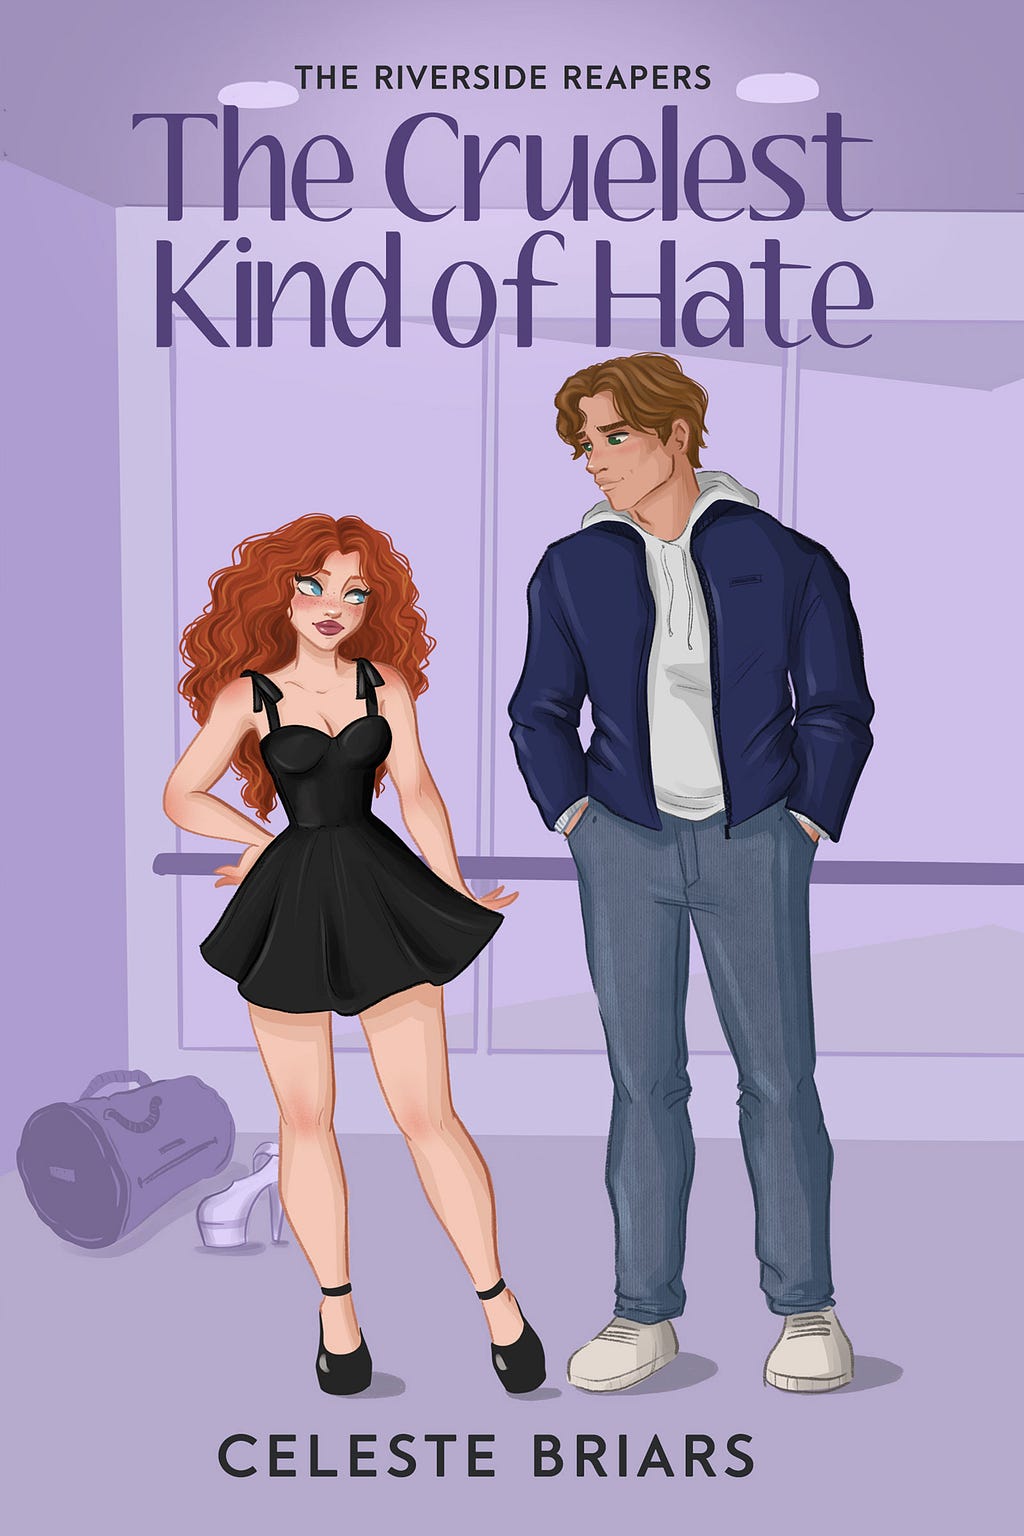 PDF The Cruelest Kind of Hate (Riverside Reapers, #3) By Celeste Briars